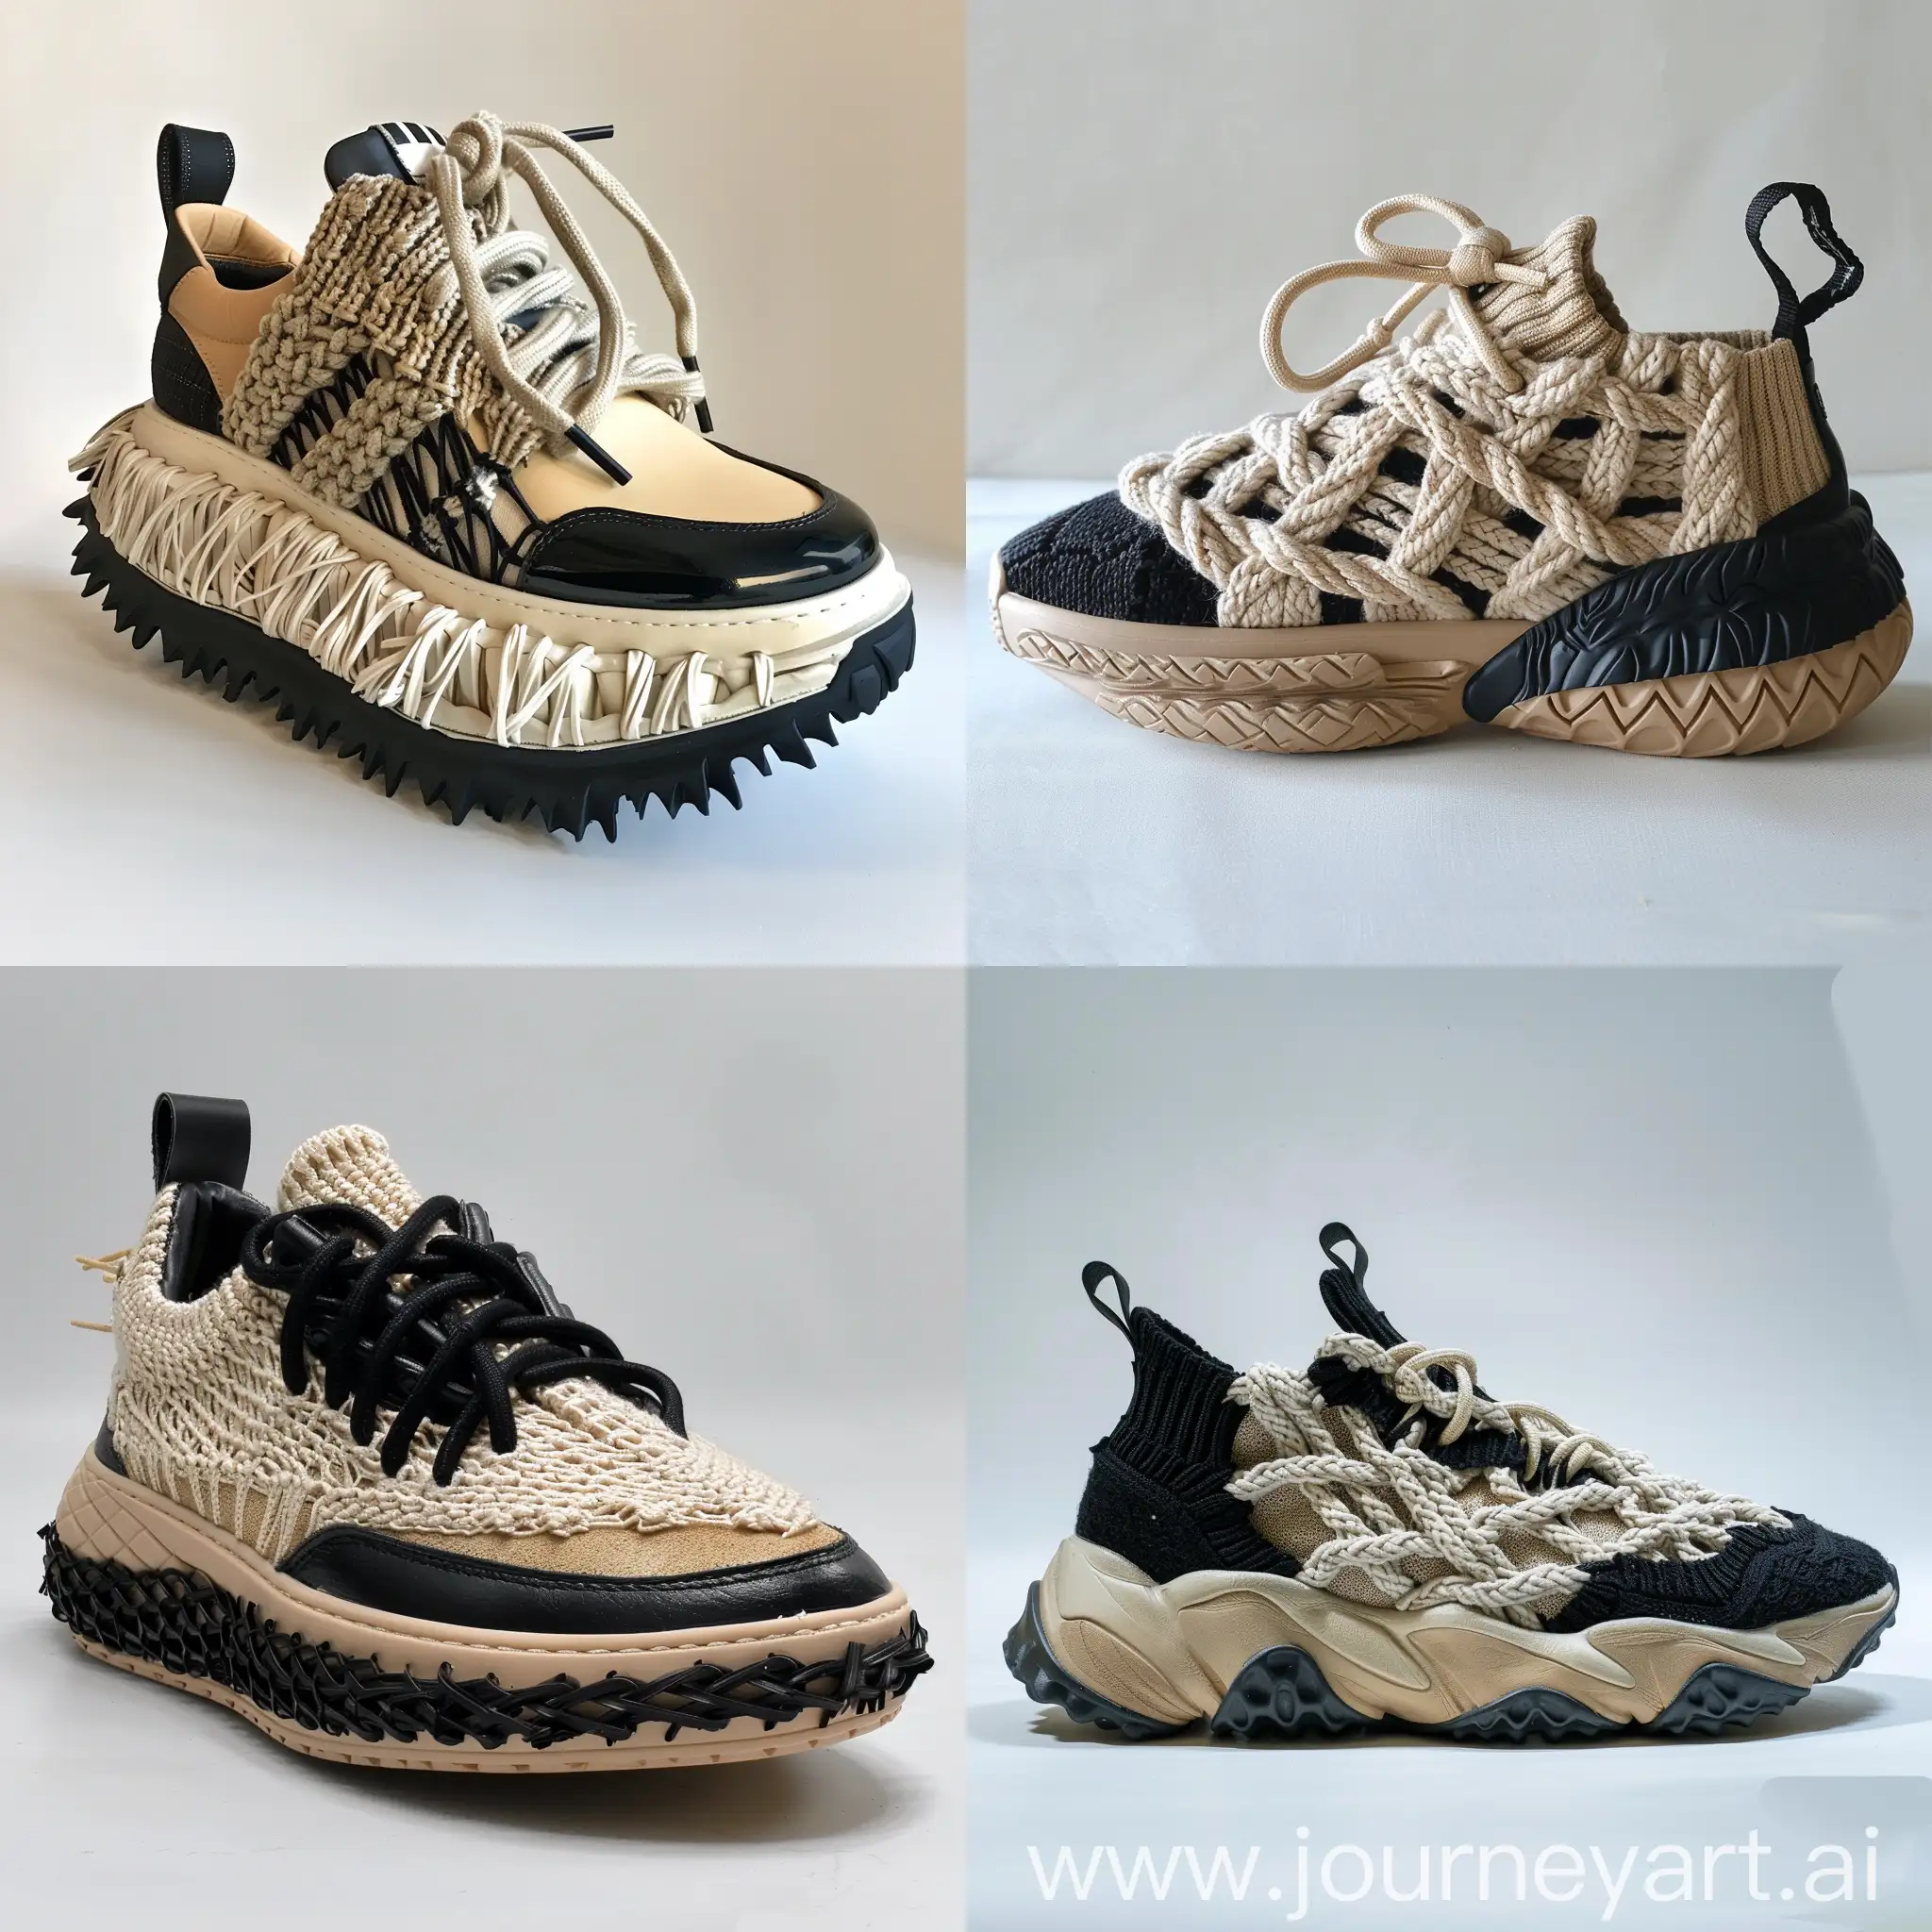 Sneakers design , inspiration by turtle , some knitted cables on it , rubber midsole , basic wide midsole , leather upper , chunky , trendy , color black/light beige , knitted laces , low neck